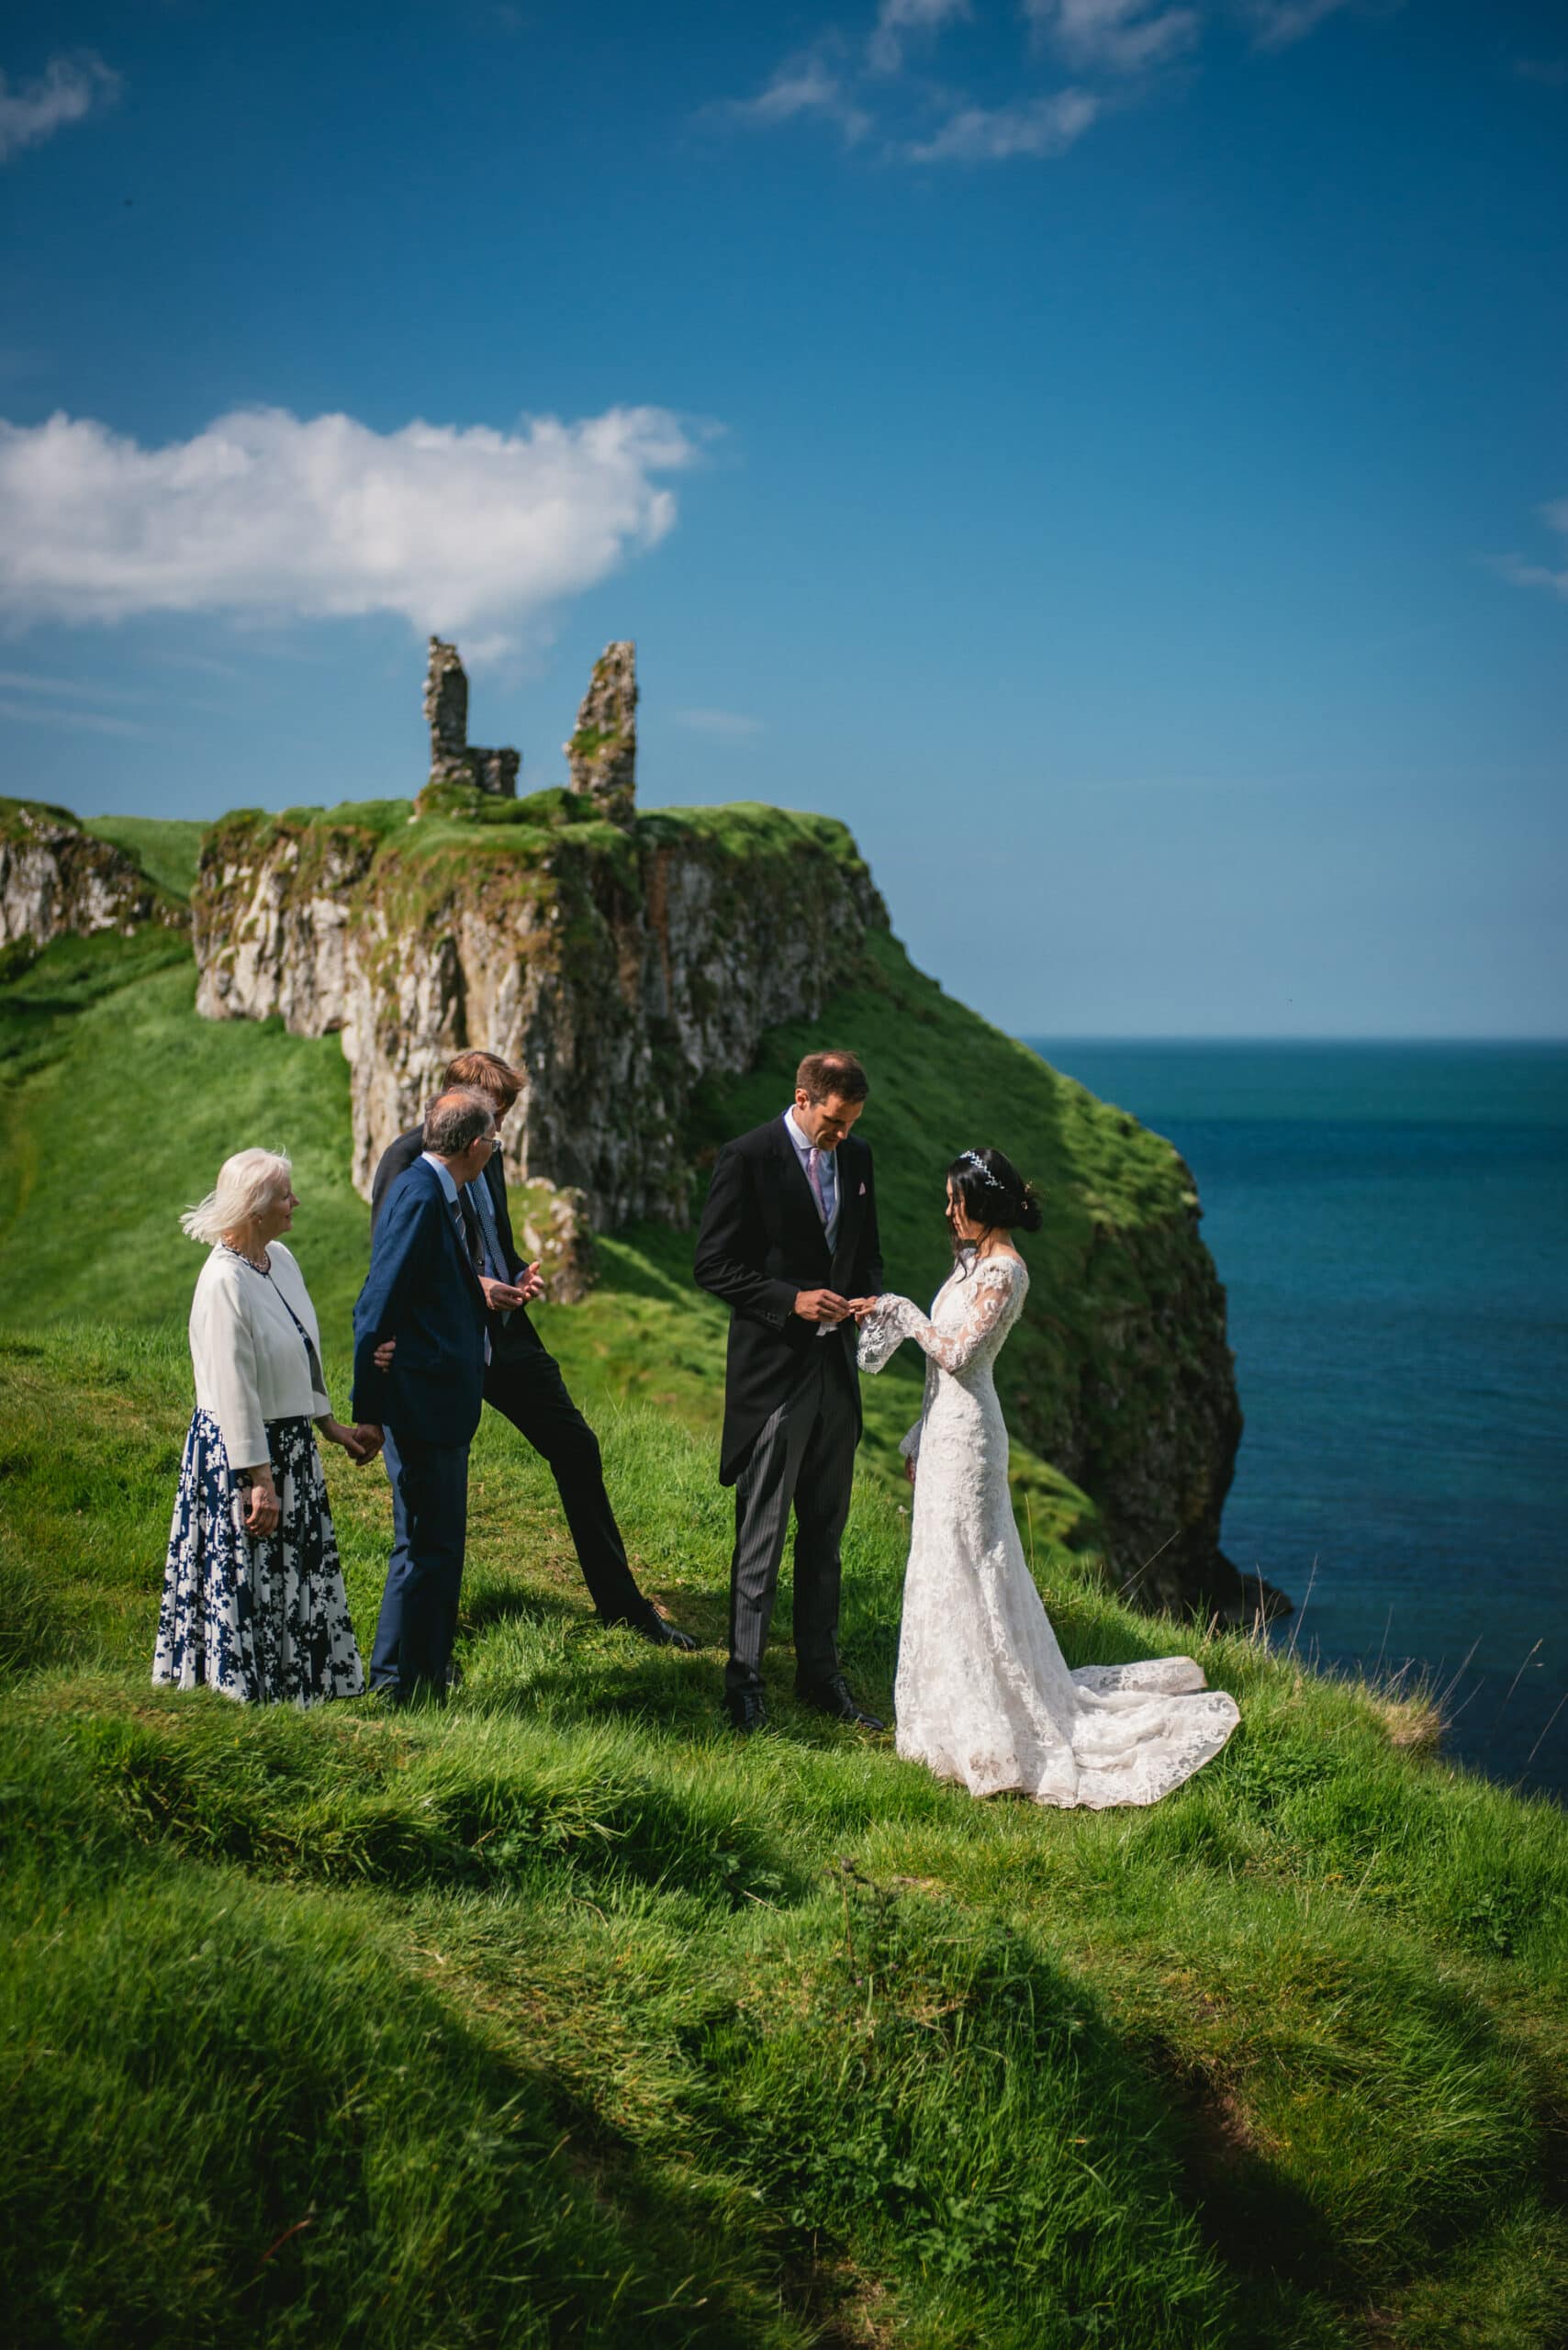 The couple exchanging heartfelt vows at historic castle ruins during their Northern Ireland elopement.